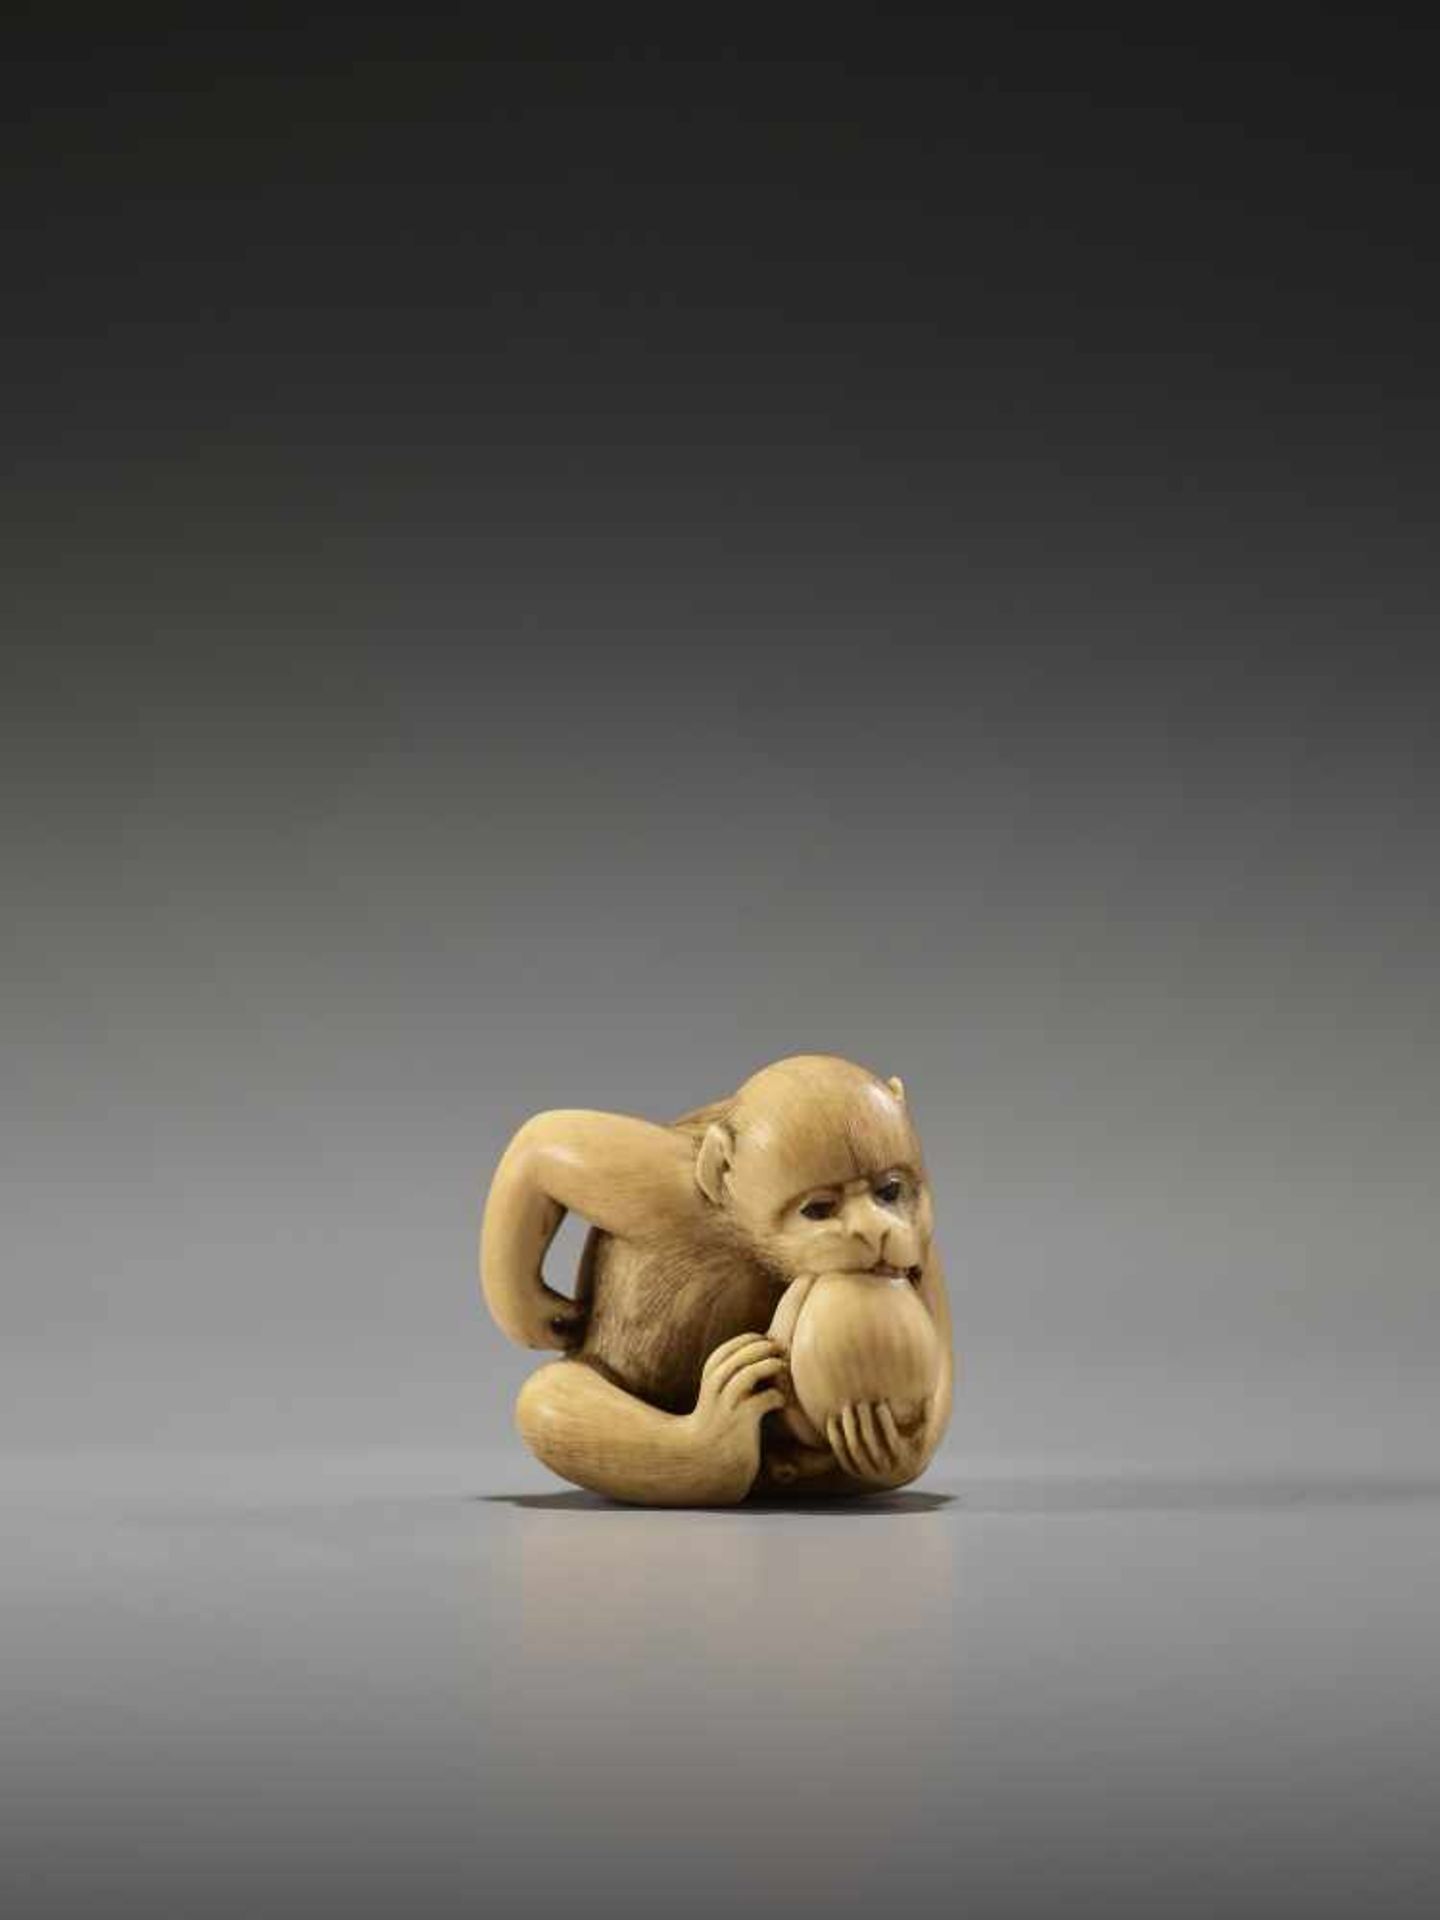 AN EXCELLENT IVORY NETSUKE OF A MONKEY EATING A PEACH BY RANTEIBy Rantei, ivory netsukeJapan, Kyoto,